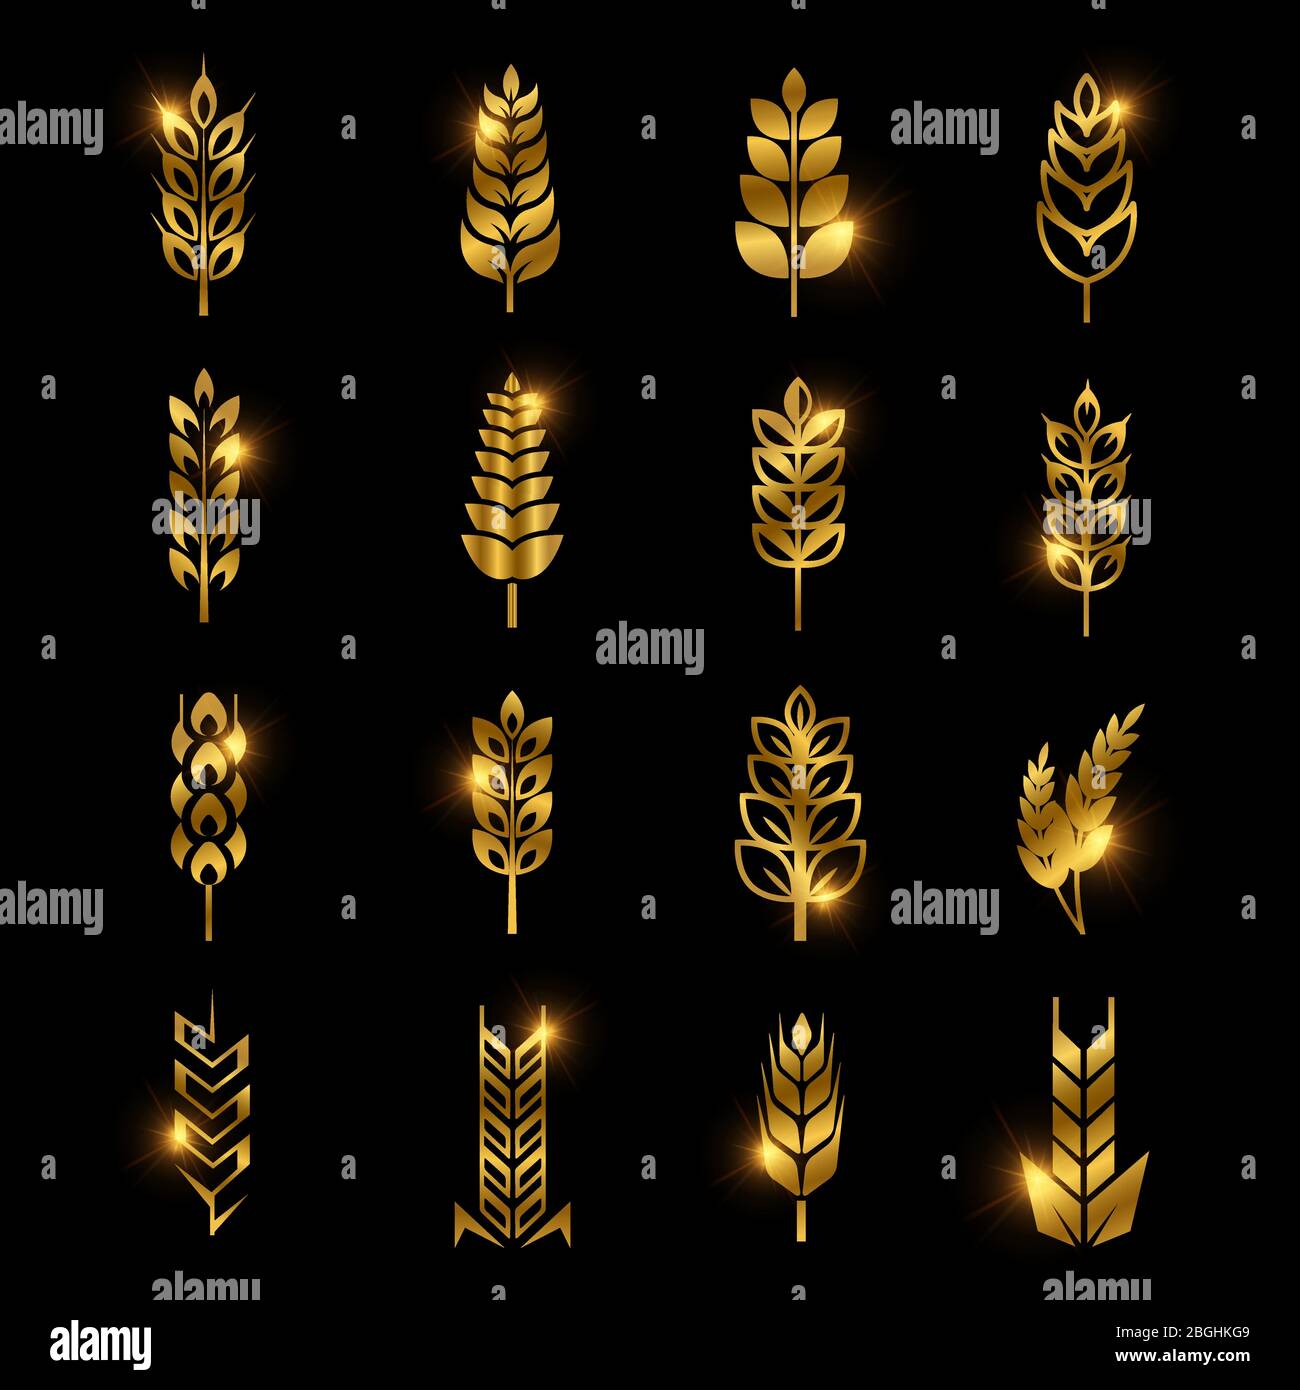 Golden wheat ears vector icons isolated on black background. Oat and barley, golden agriculture food illustration Stock Vector